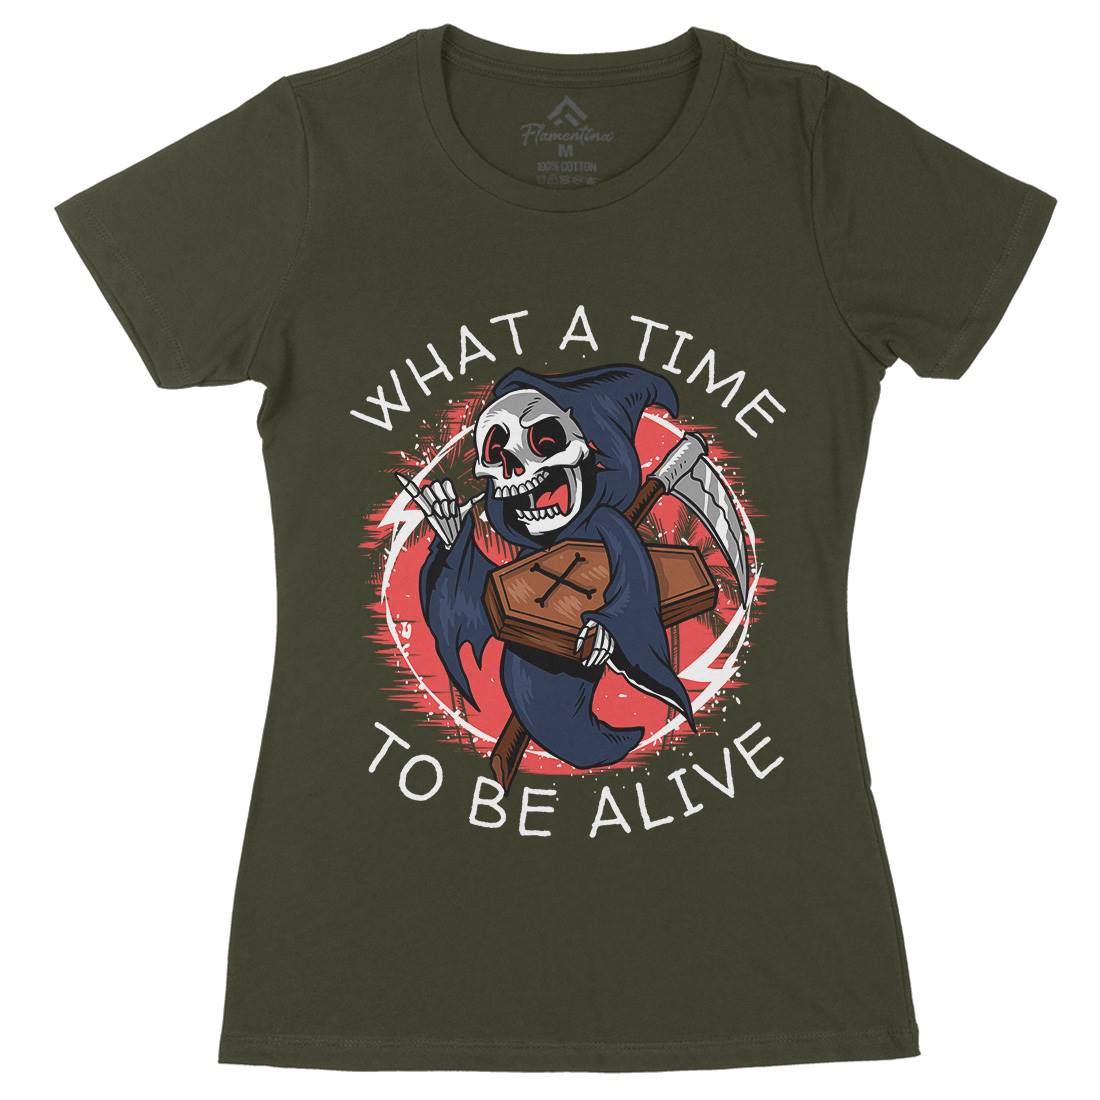 What A Time To Be Alive Womens Organic Crew Neck T-Shirt Funny D096